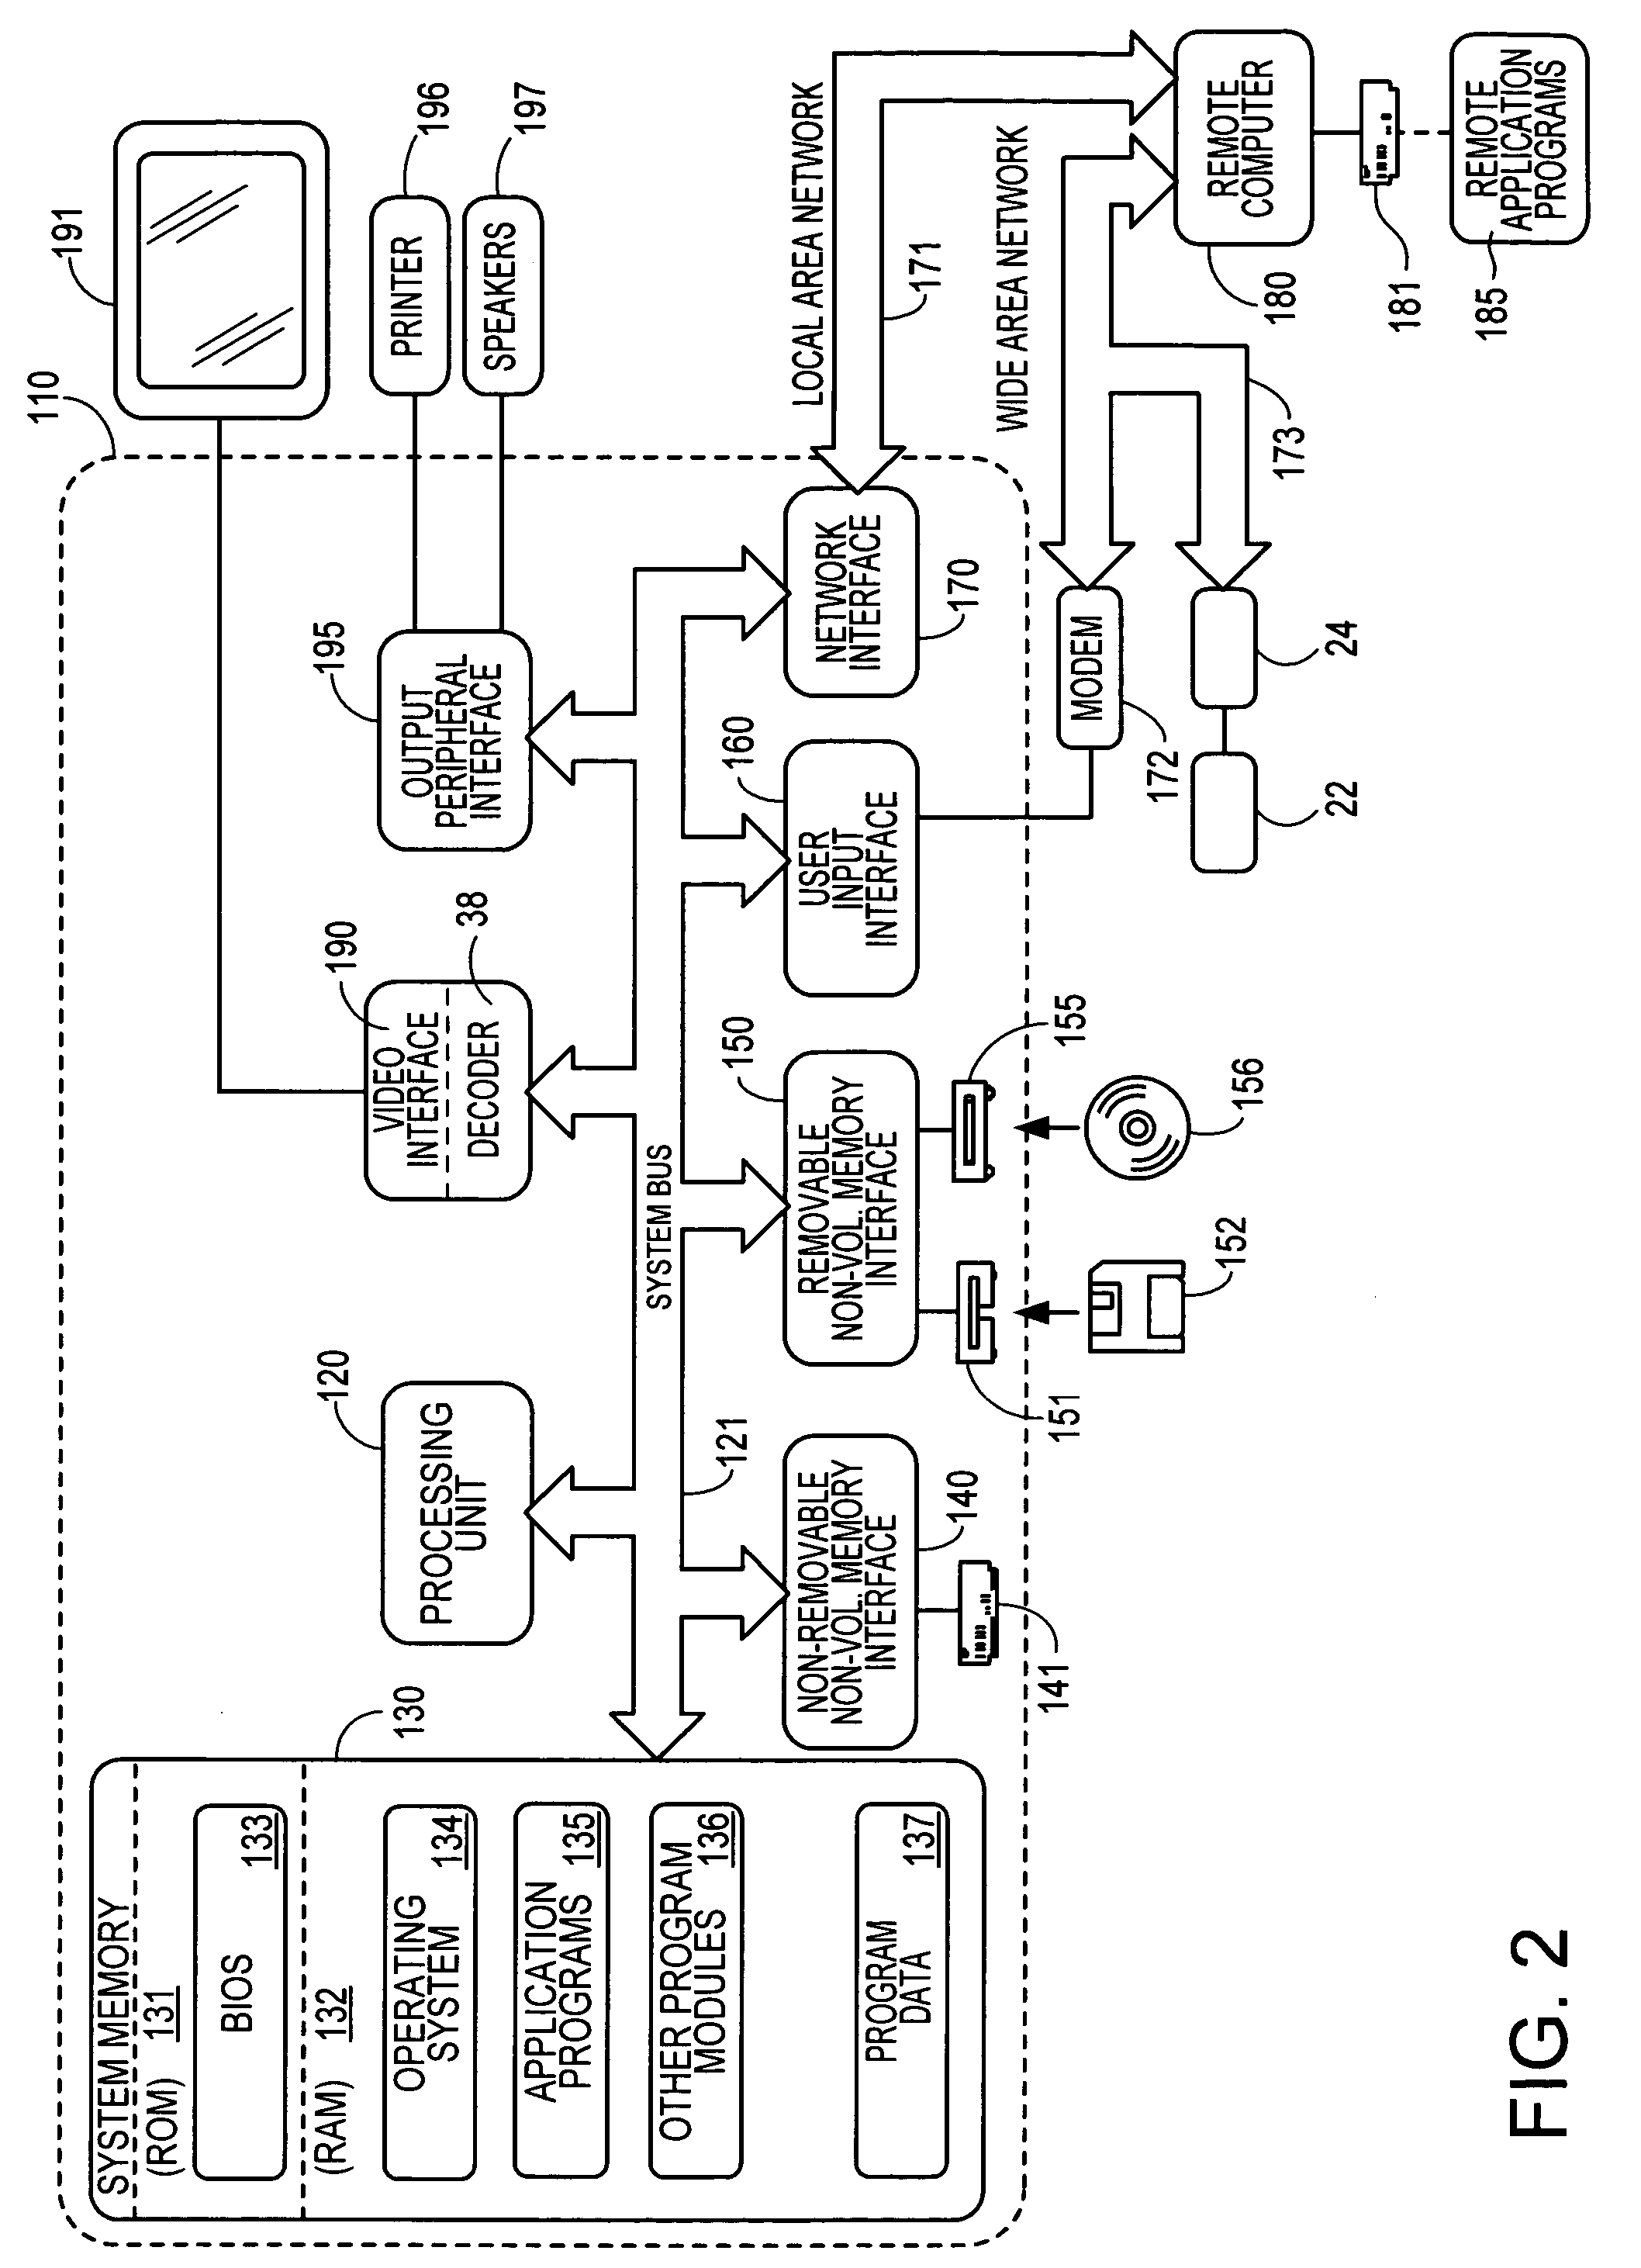 Method and apparatus to decode a streaming file directly to display drivers